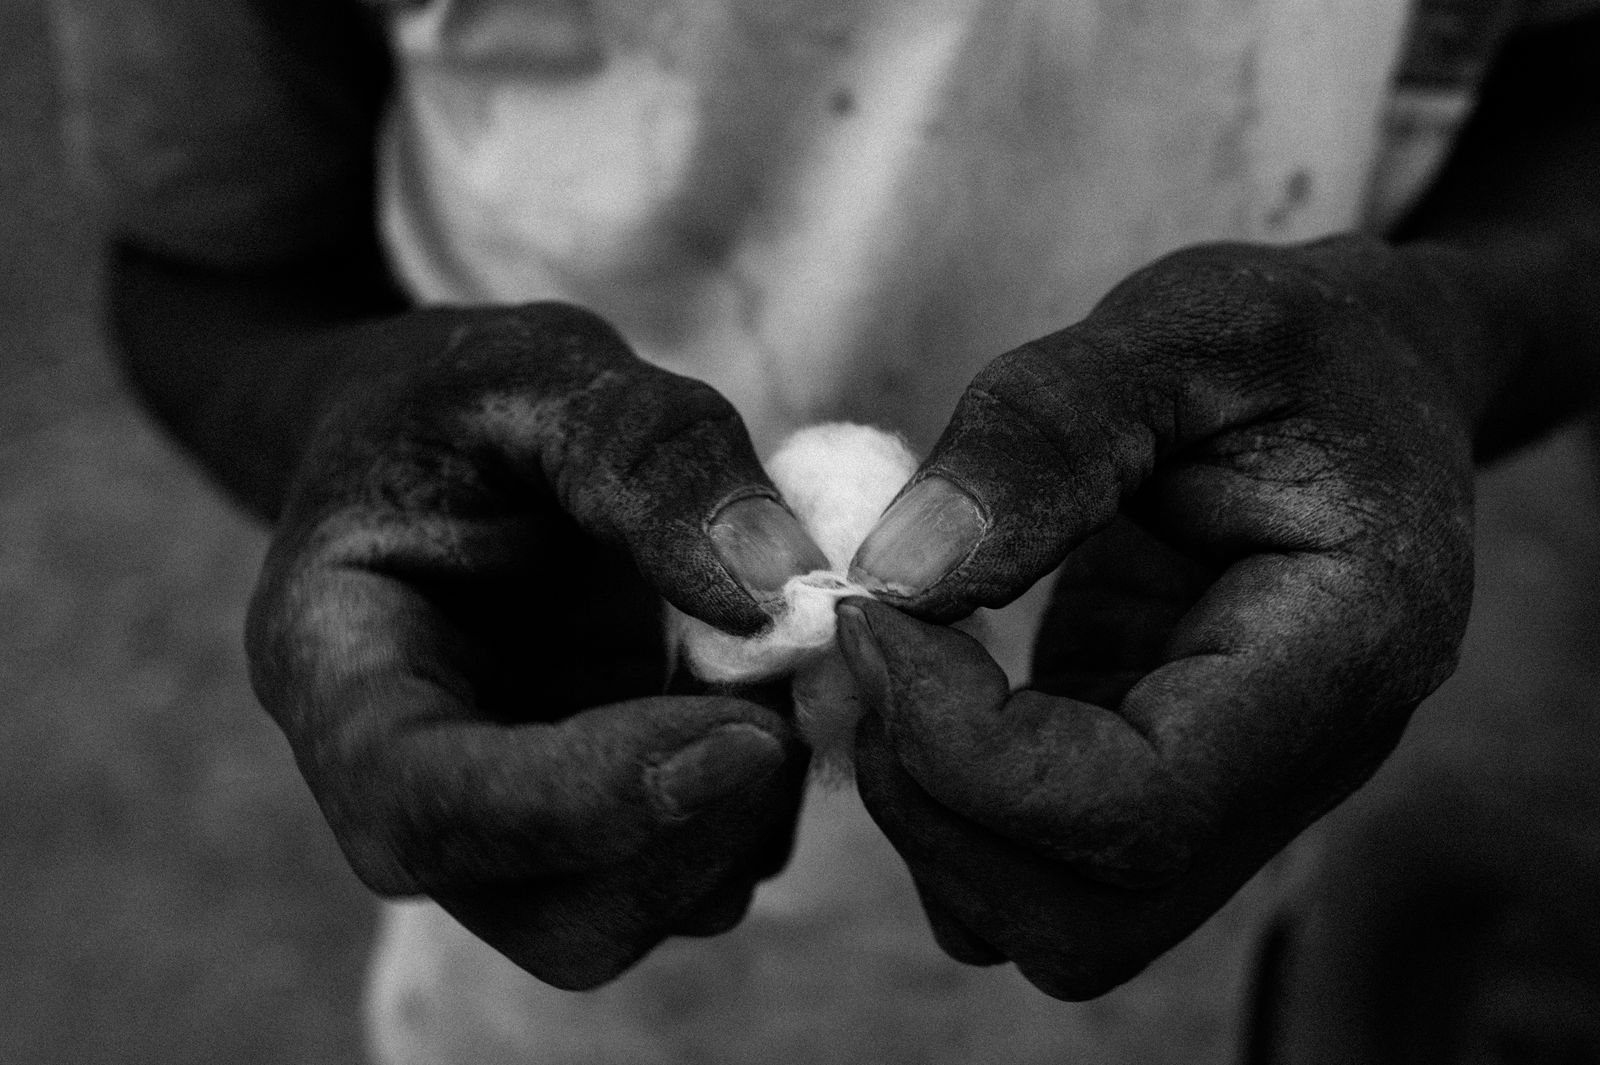 © Jost Franko - A farmer extracts the seed out of the cotton crop, in Boromo, Burkina Faso, on November 28th 2015.